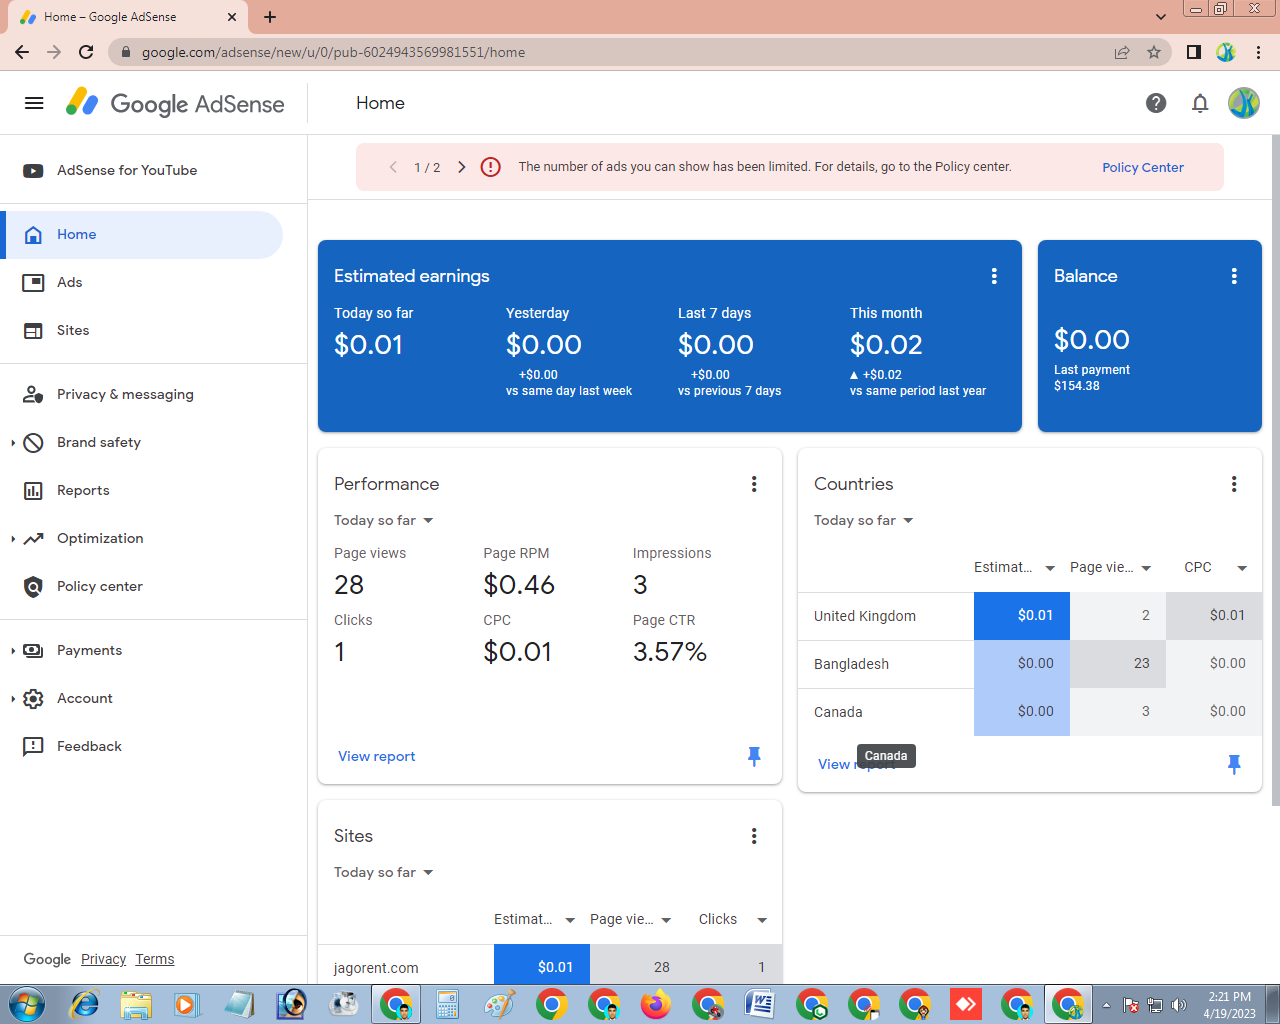 86524adsense+ Website sell fast time payment recipe ads live